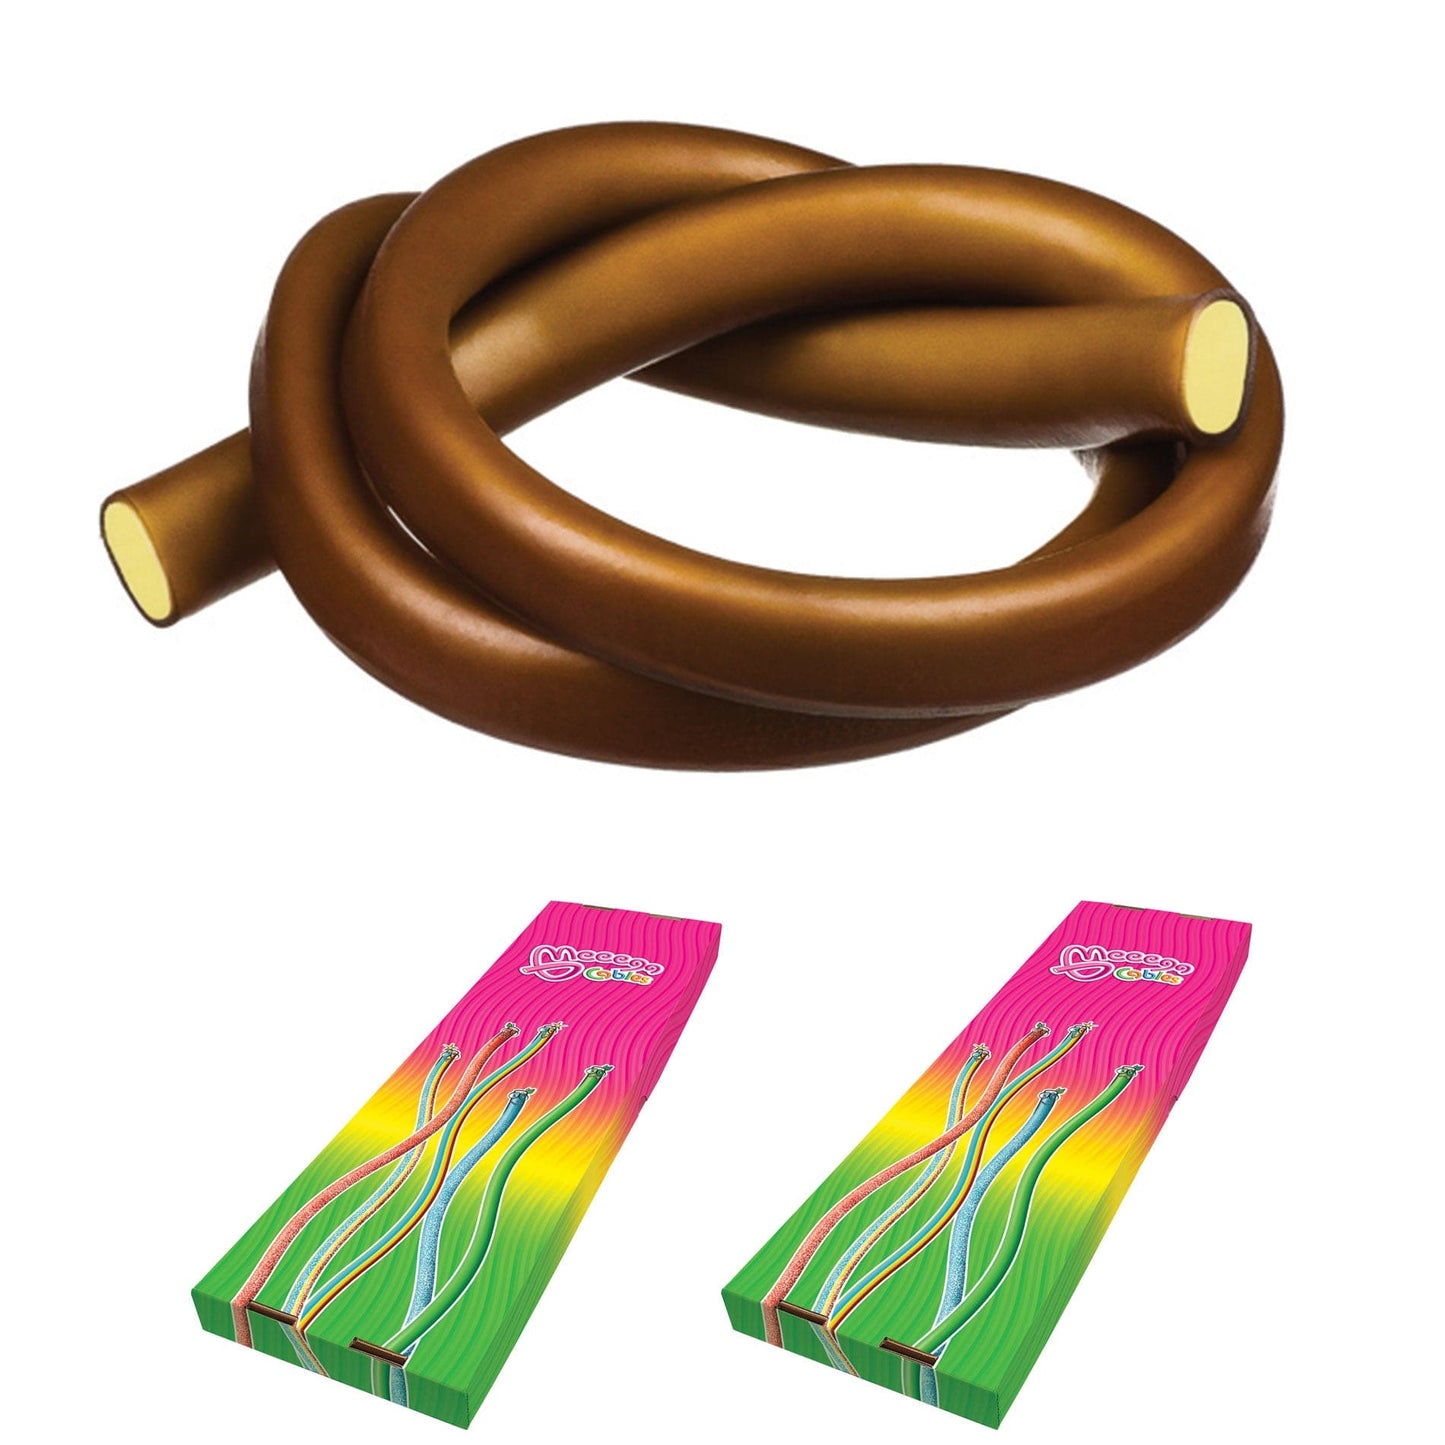 Novelty Concessions Gummy Rope COLA / 2 Pack (60 pieces) Meeega Cables European Chewy Rope Candy - Box of 30 individually wrapped Meeega Cables, each over 2-feet long cups with lids and straws